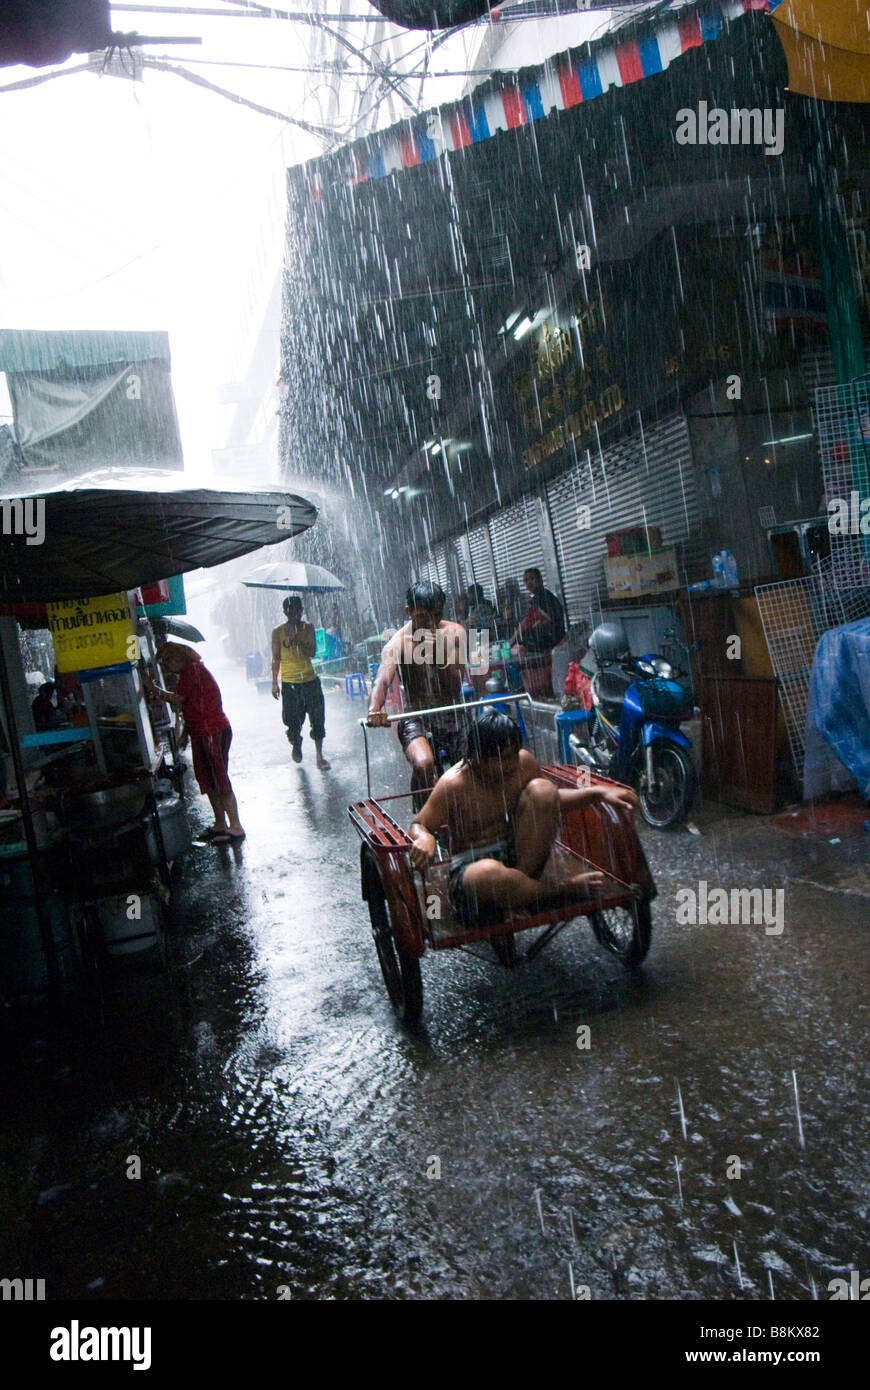 People caught in monsoon downpour in alleyway Chinatown central Bangkok Thailand Stock Photo